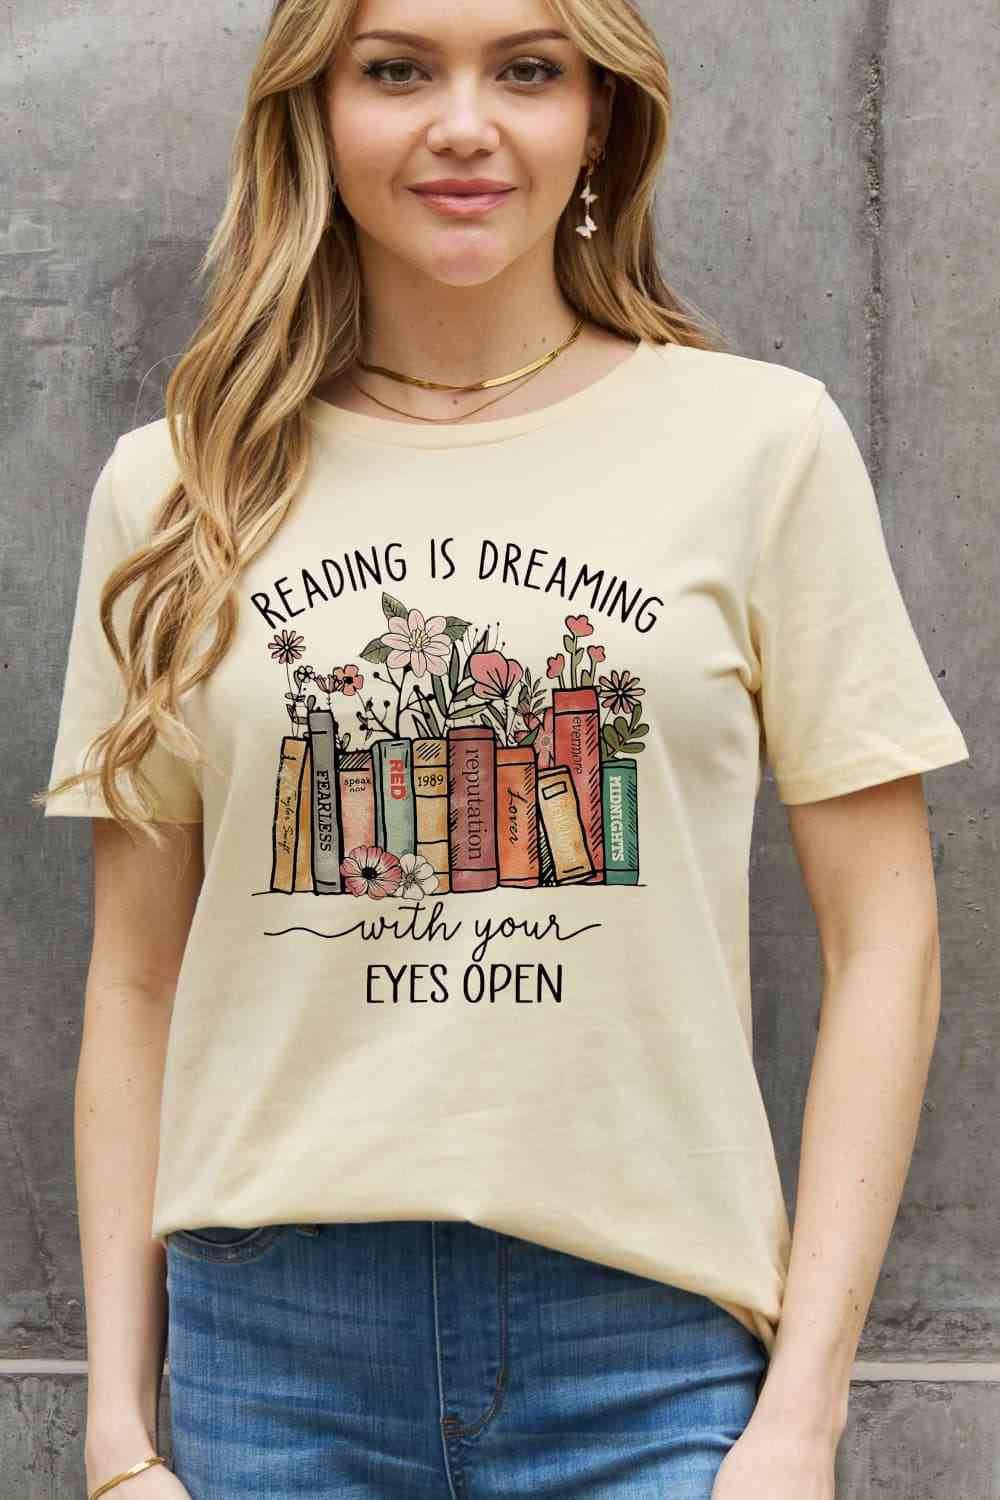 READING IS DREAMING WITH YOUR EYES OPEN Graphic Cotton Tee - Ivory / S - T-Shirts - Shirts & Tops - 13 - 2024